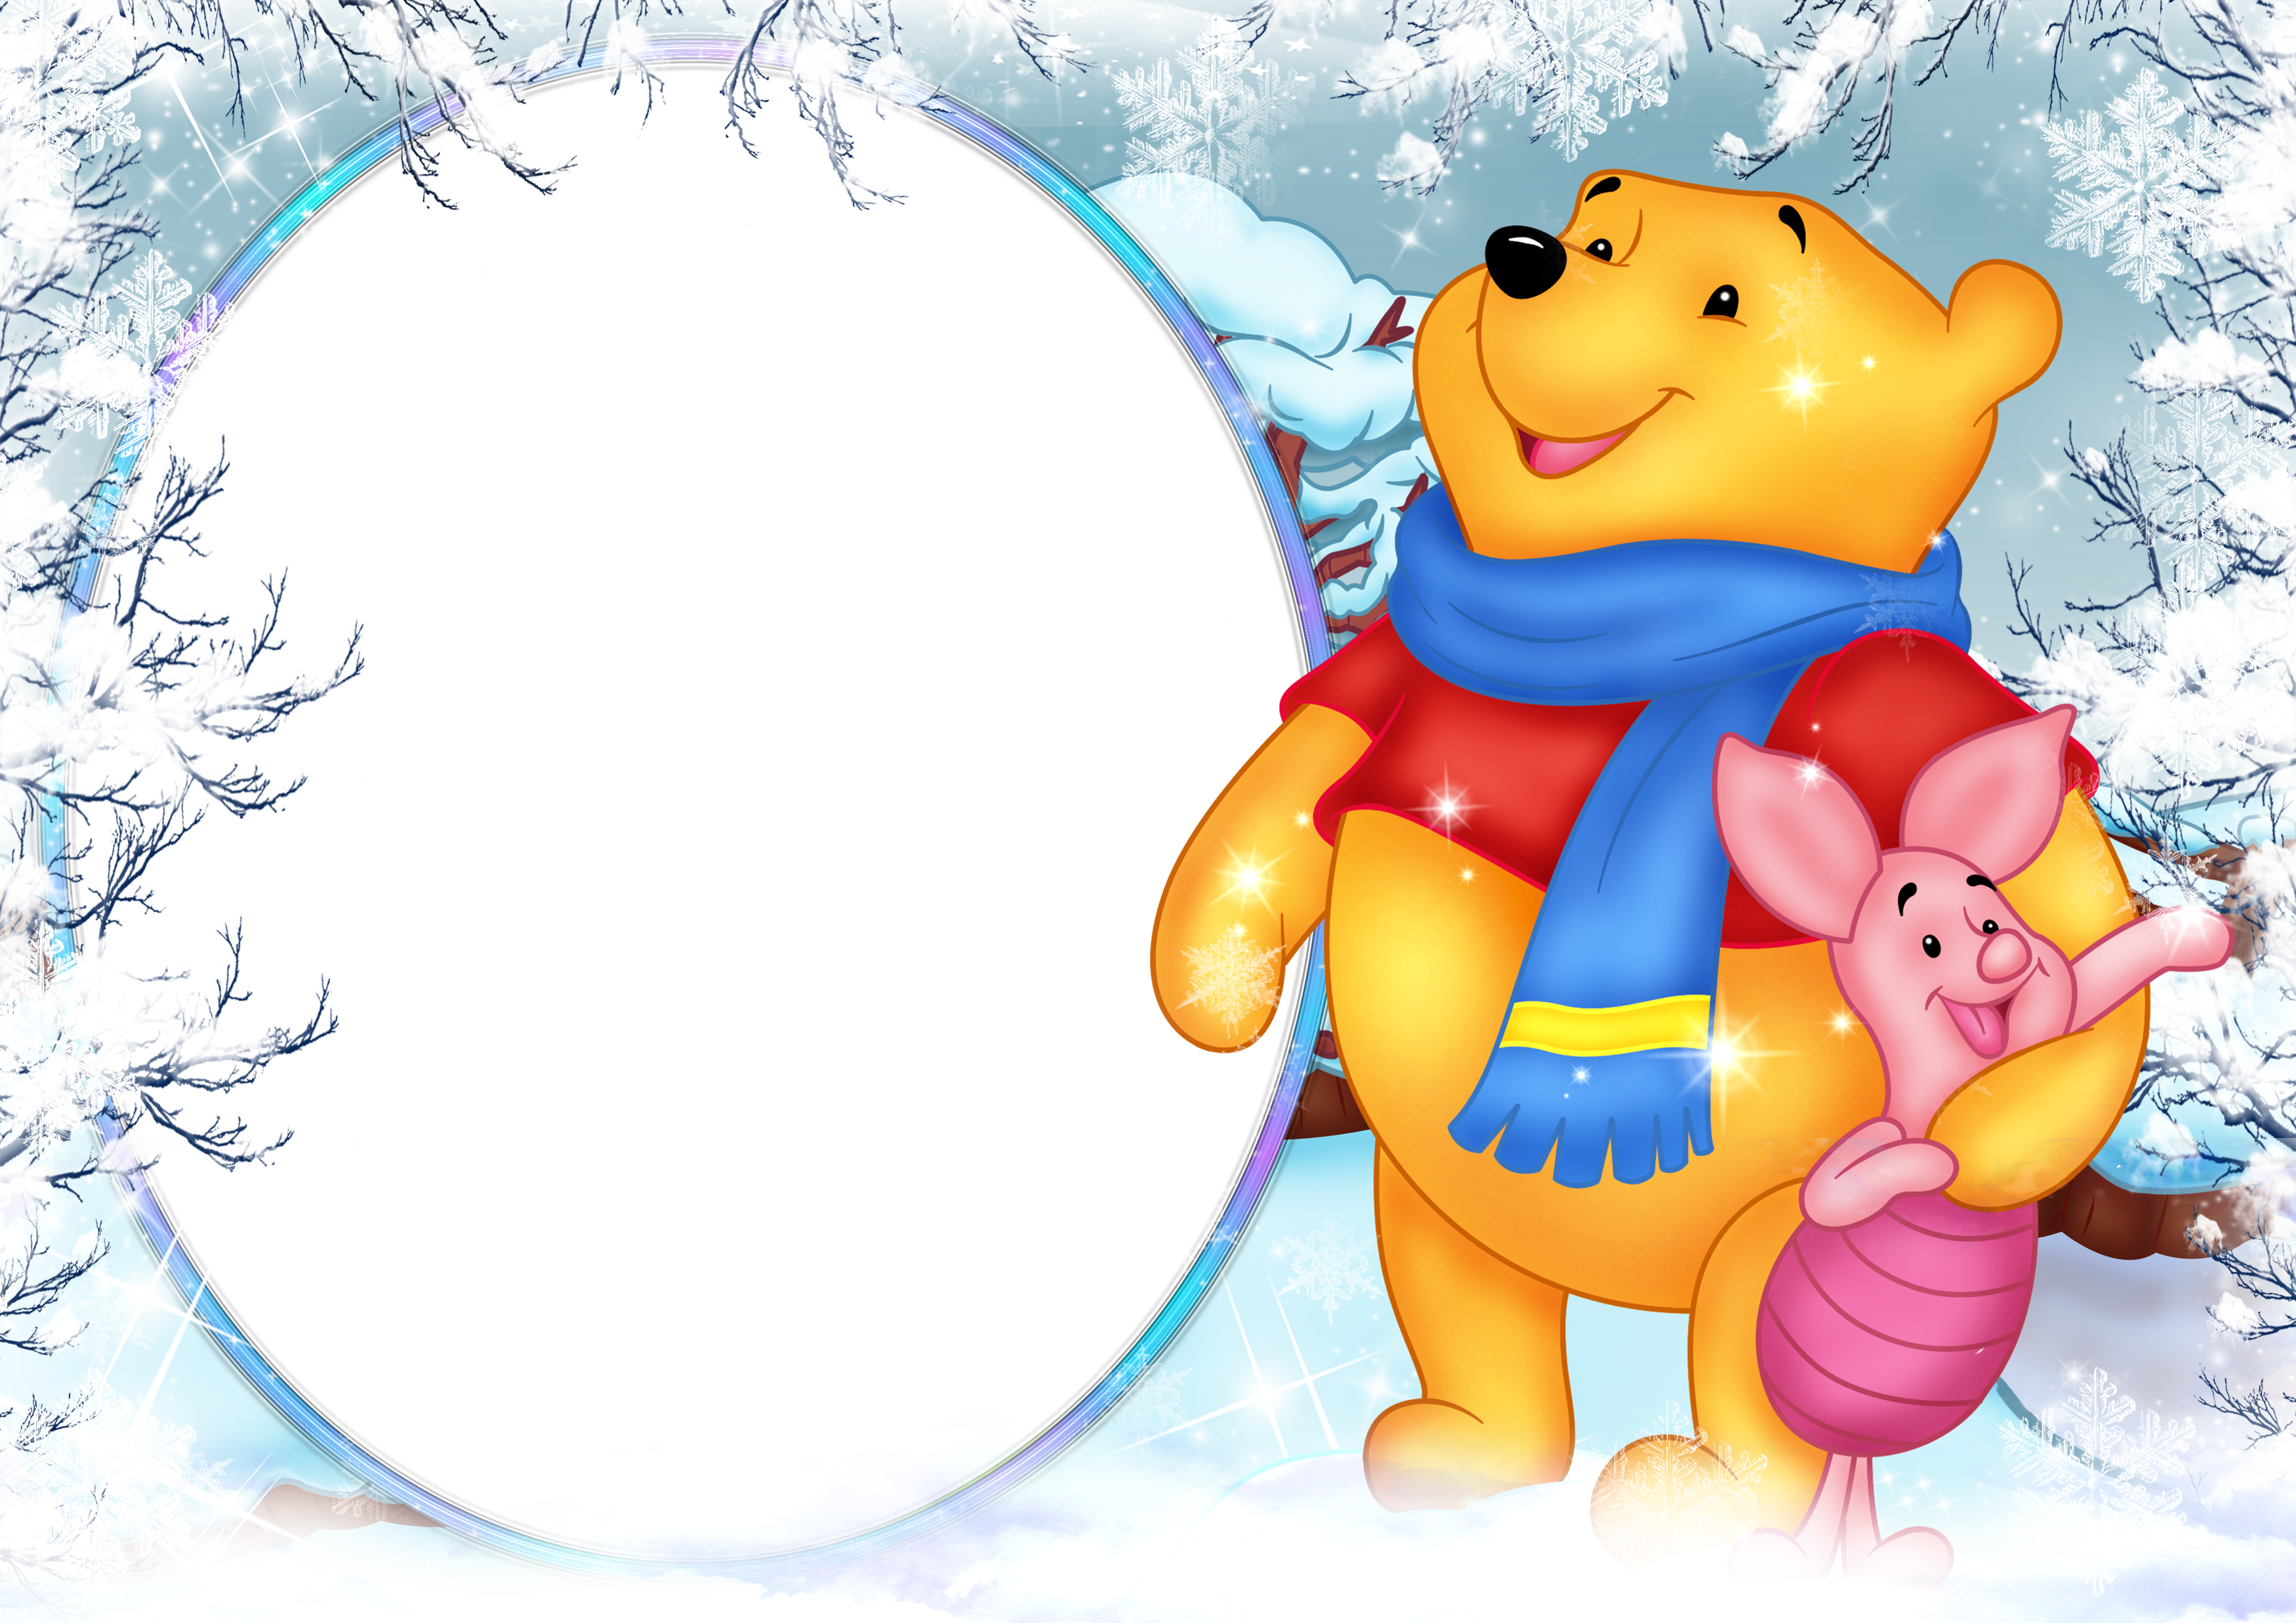 Winnie the Pooh Winter Holiday PNG Photo Frame.